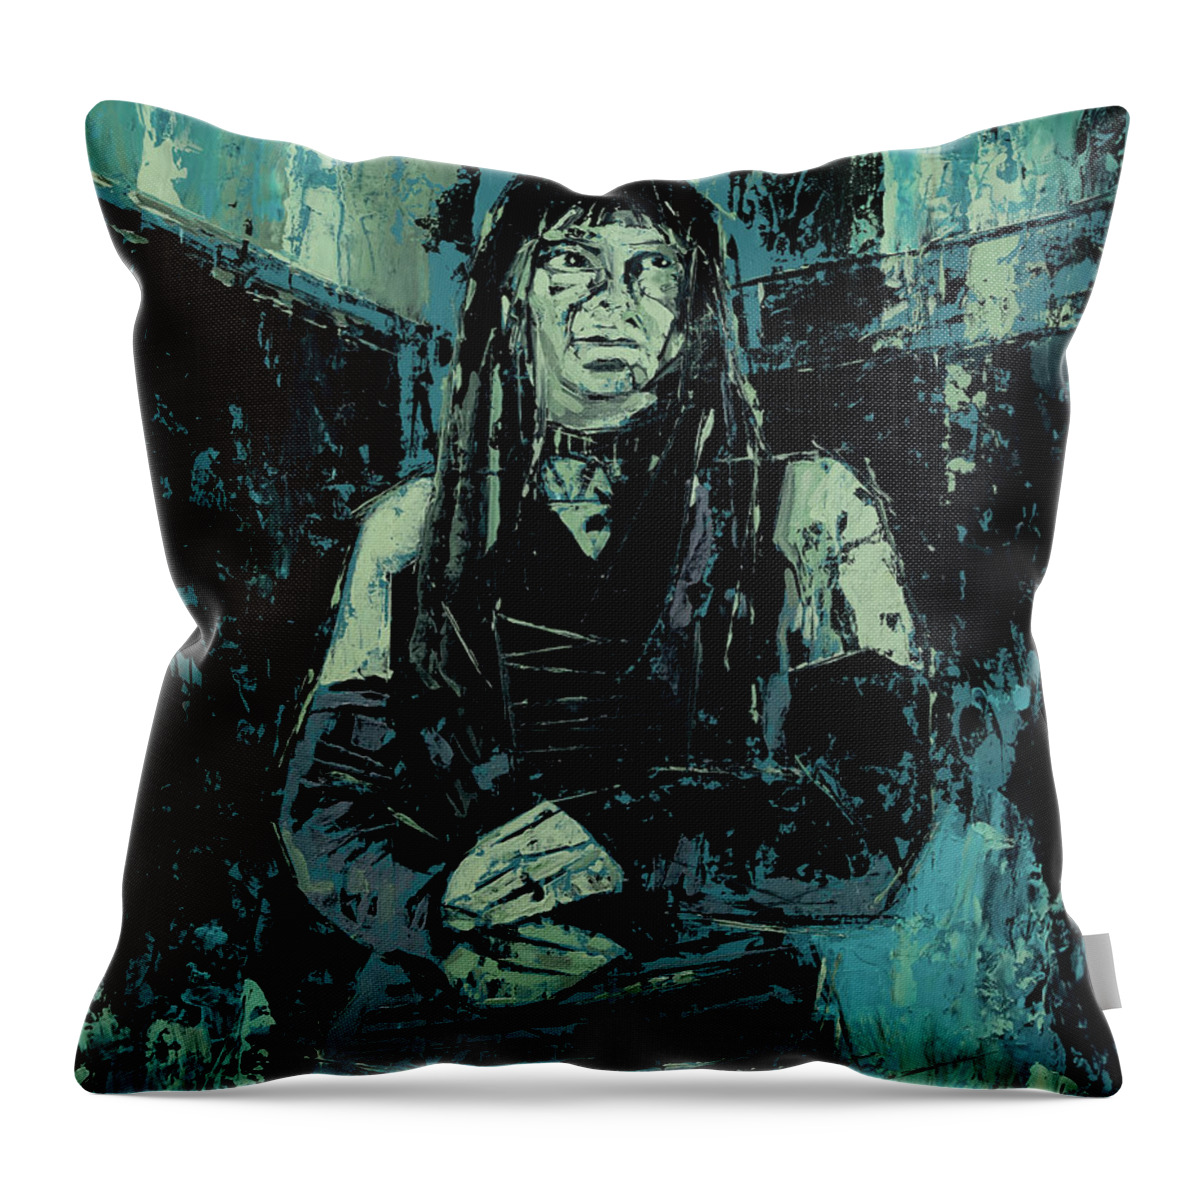 Dress Throw Pillow featuring the painting Girl in Green Room by Sv Bell